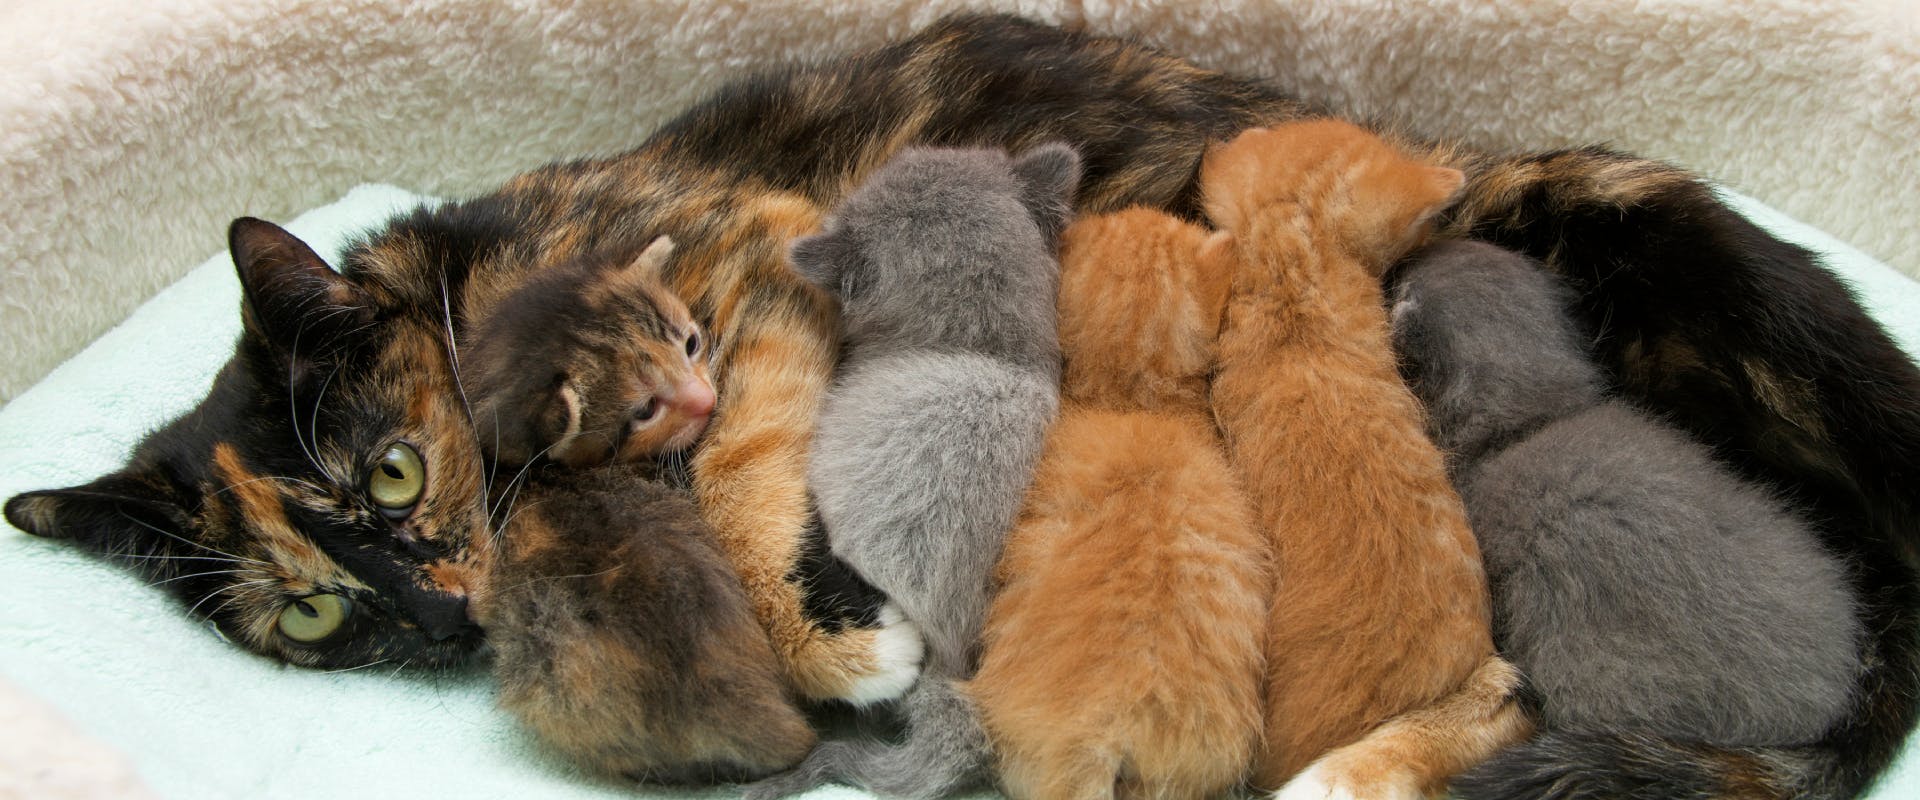 a calico queen nursing a litter of five different colored kittens in a cat basket